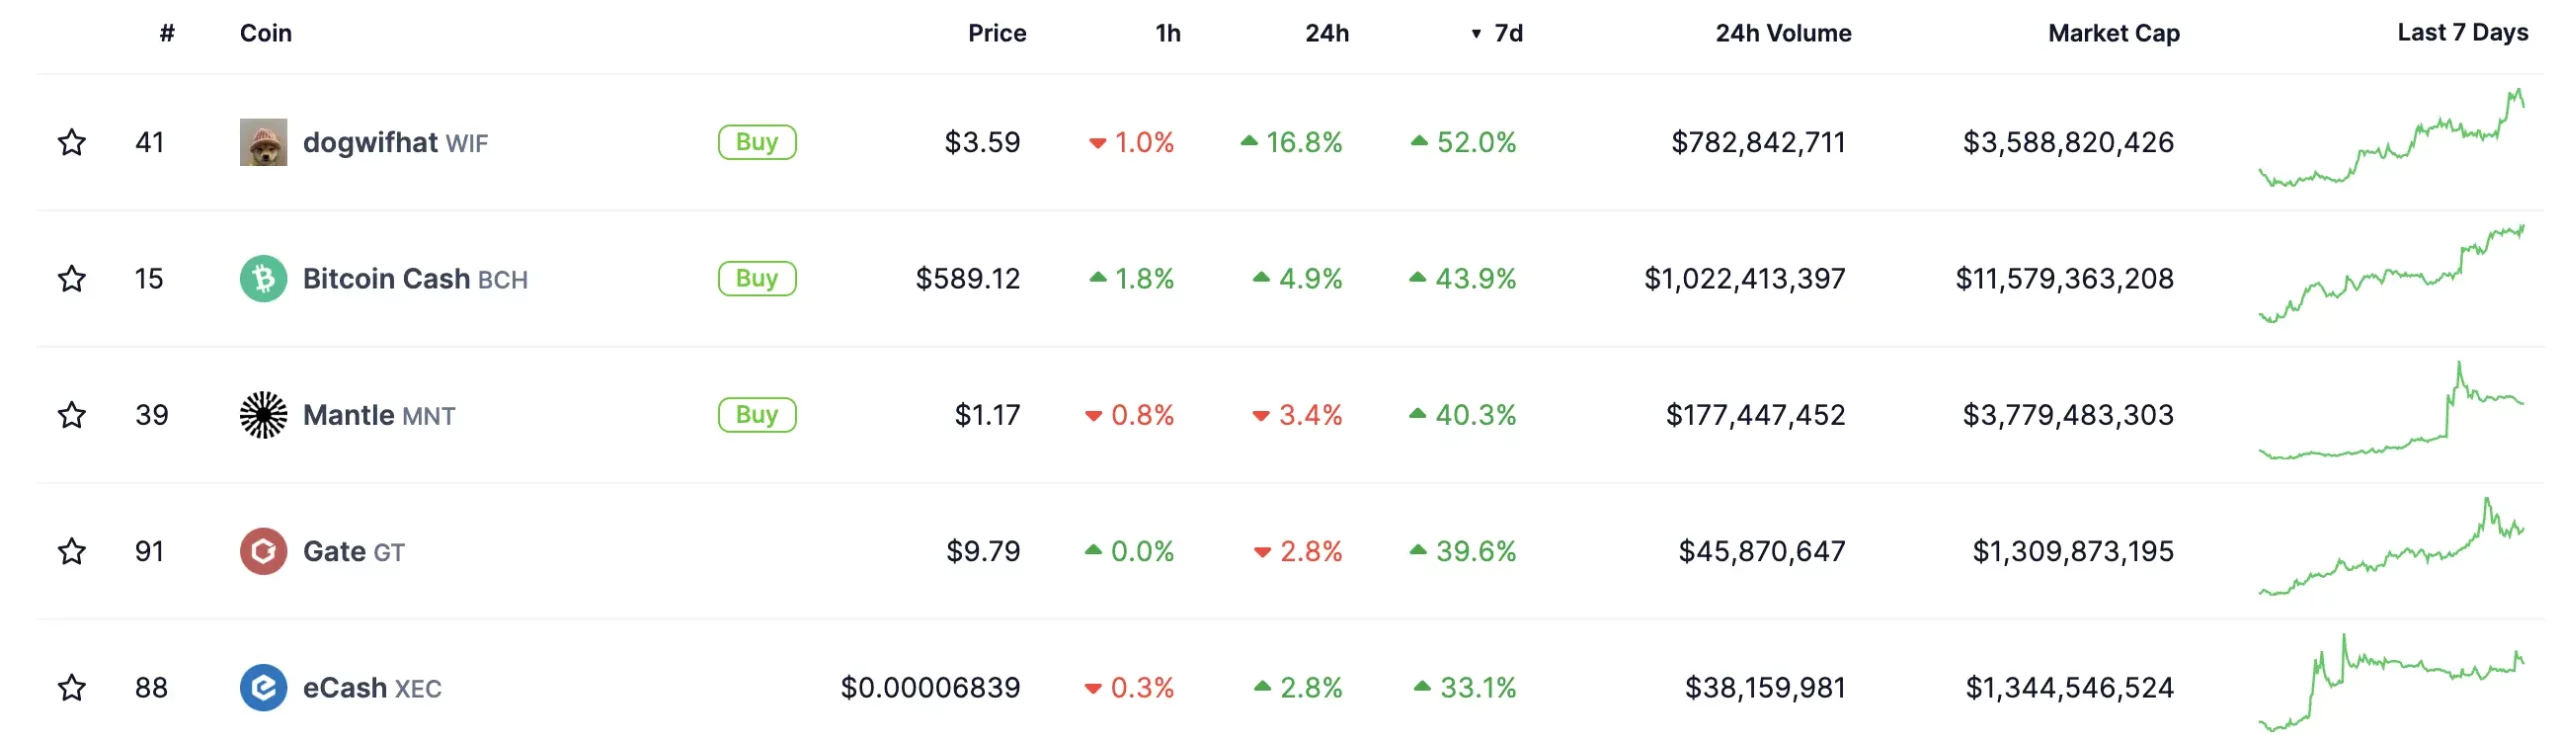 Top 5 Crypto Gainers in Last 7 Days